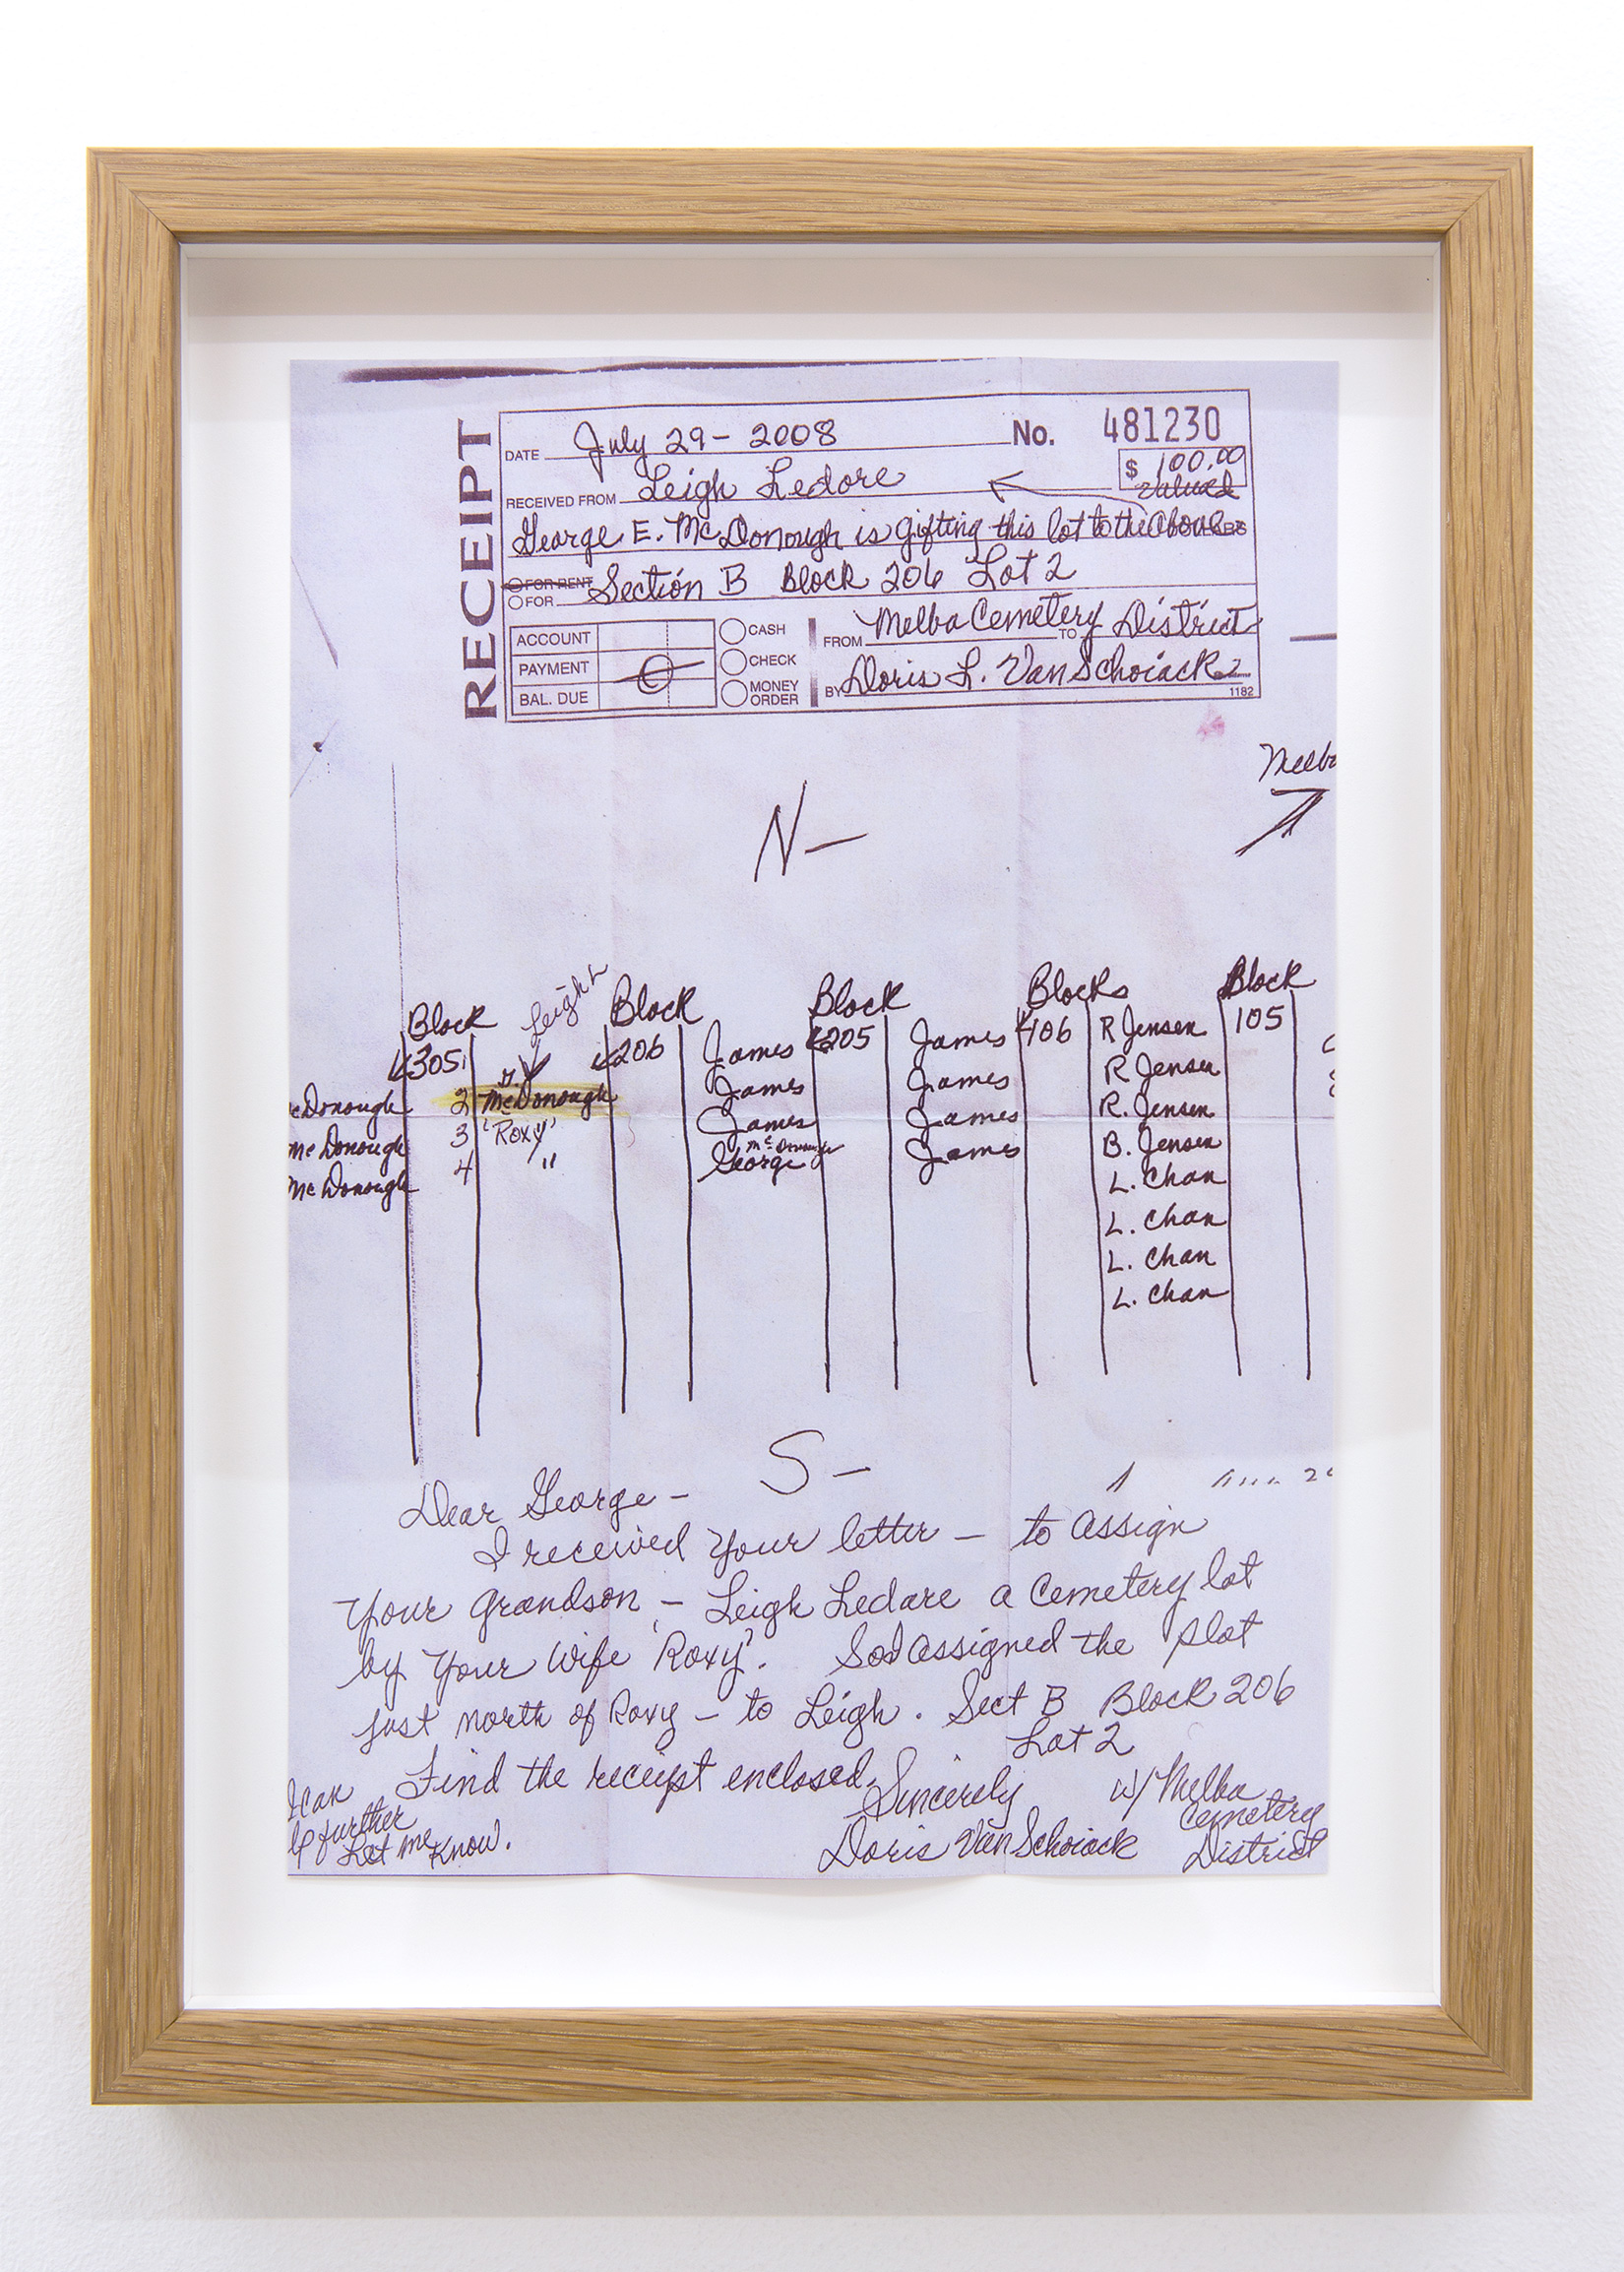 Leigh Ledare, "Upon the Death of My Grandfather" (detail), (July 29, 2008 – August 17, 2011), paper, 3 pieces, 210 × 297 mm each (framed)